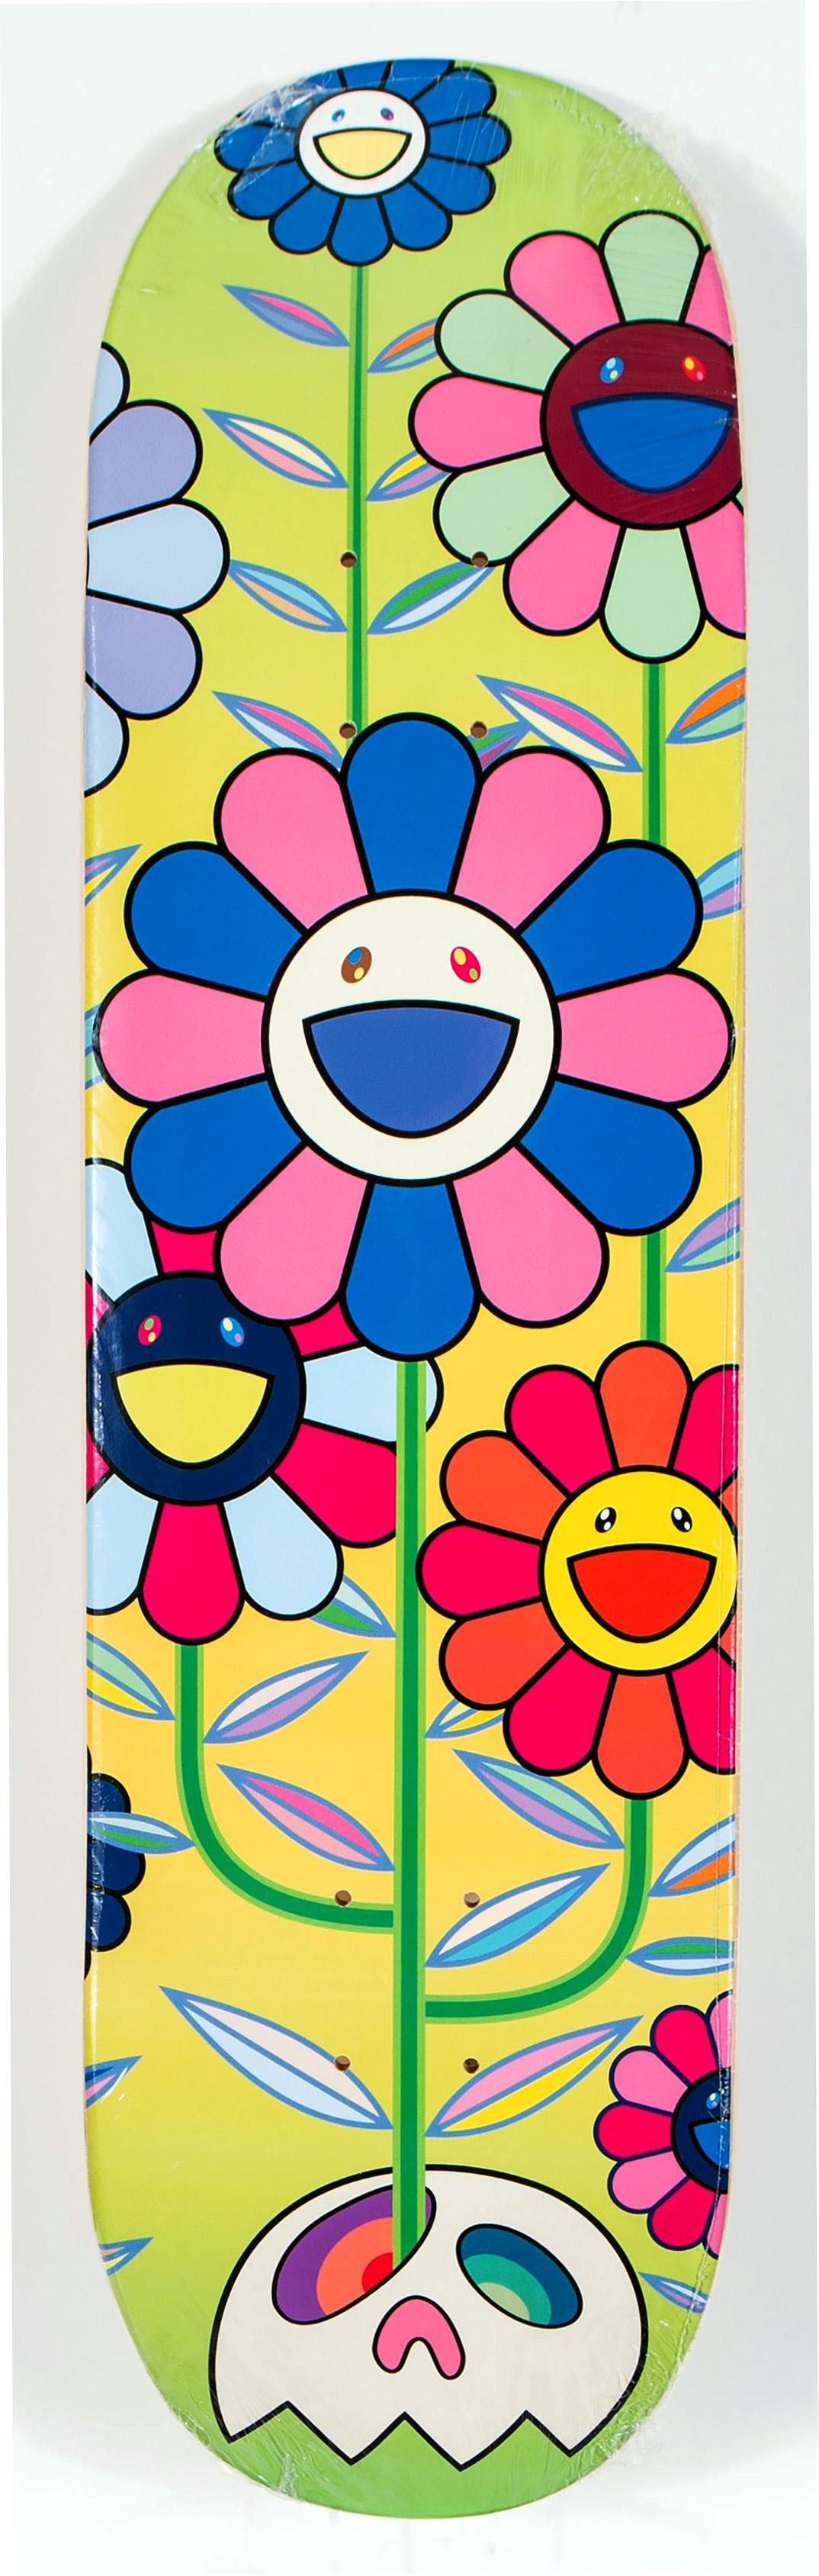 Takashi Murakami Flowers Skateboard Decks 2017 & 2019: set of 2 works:

A vibrant set of Takashi Murakami wall art produced as a limited series in conjunction with the 2017 Murakami exhibit: The Octopus Eats Its Own Leg, MCA Chicago & Complexcon